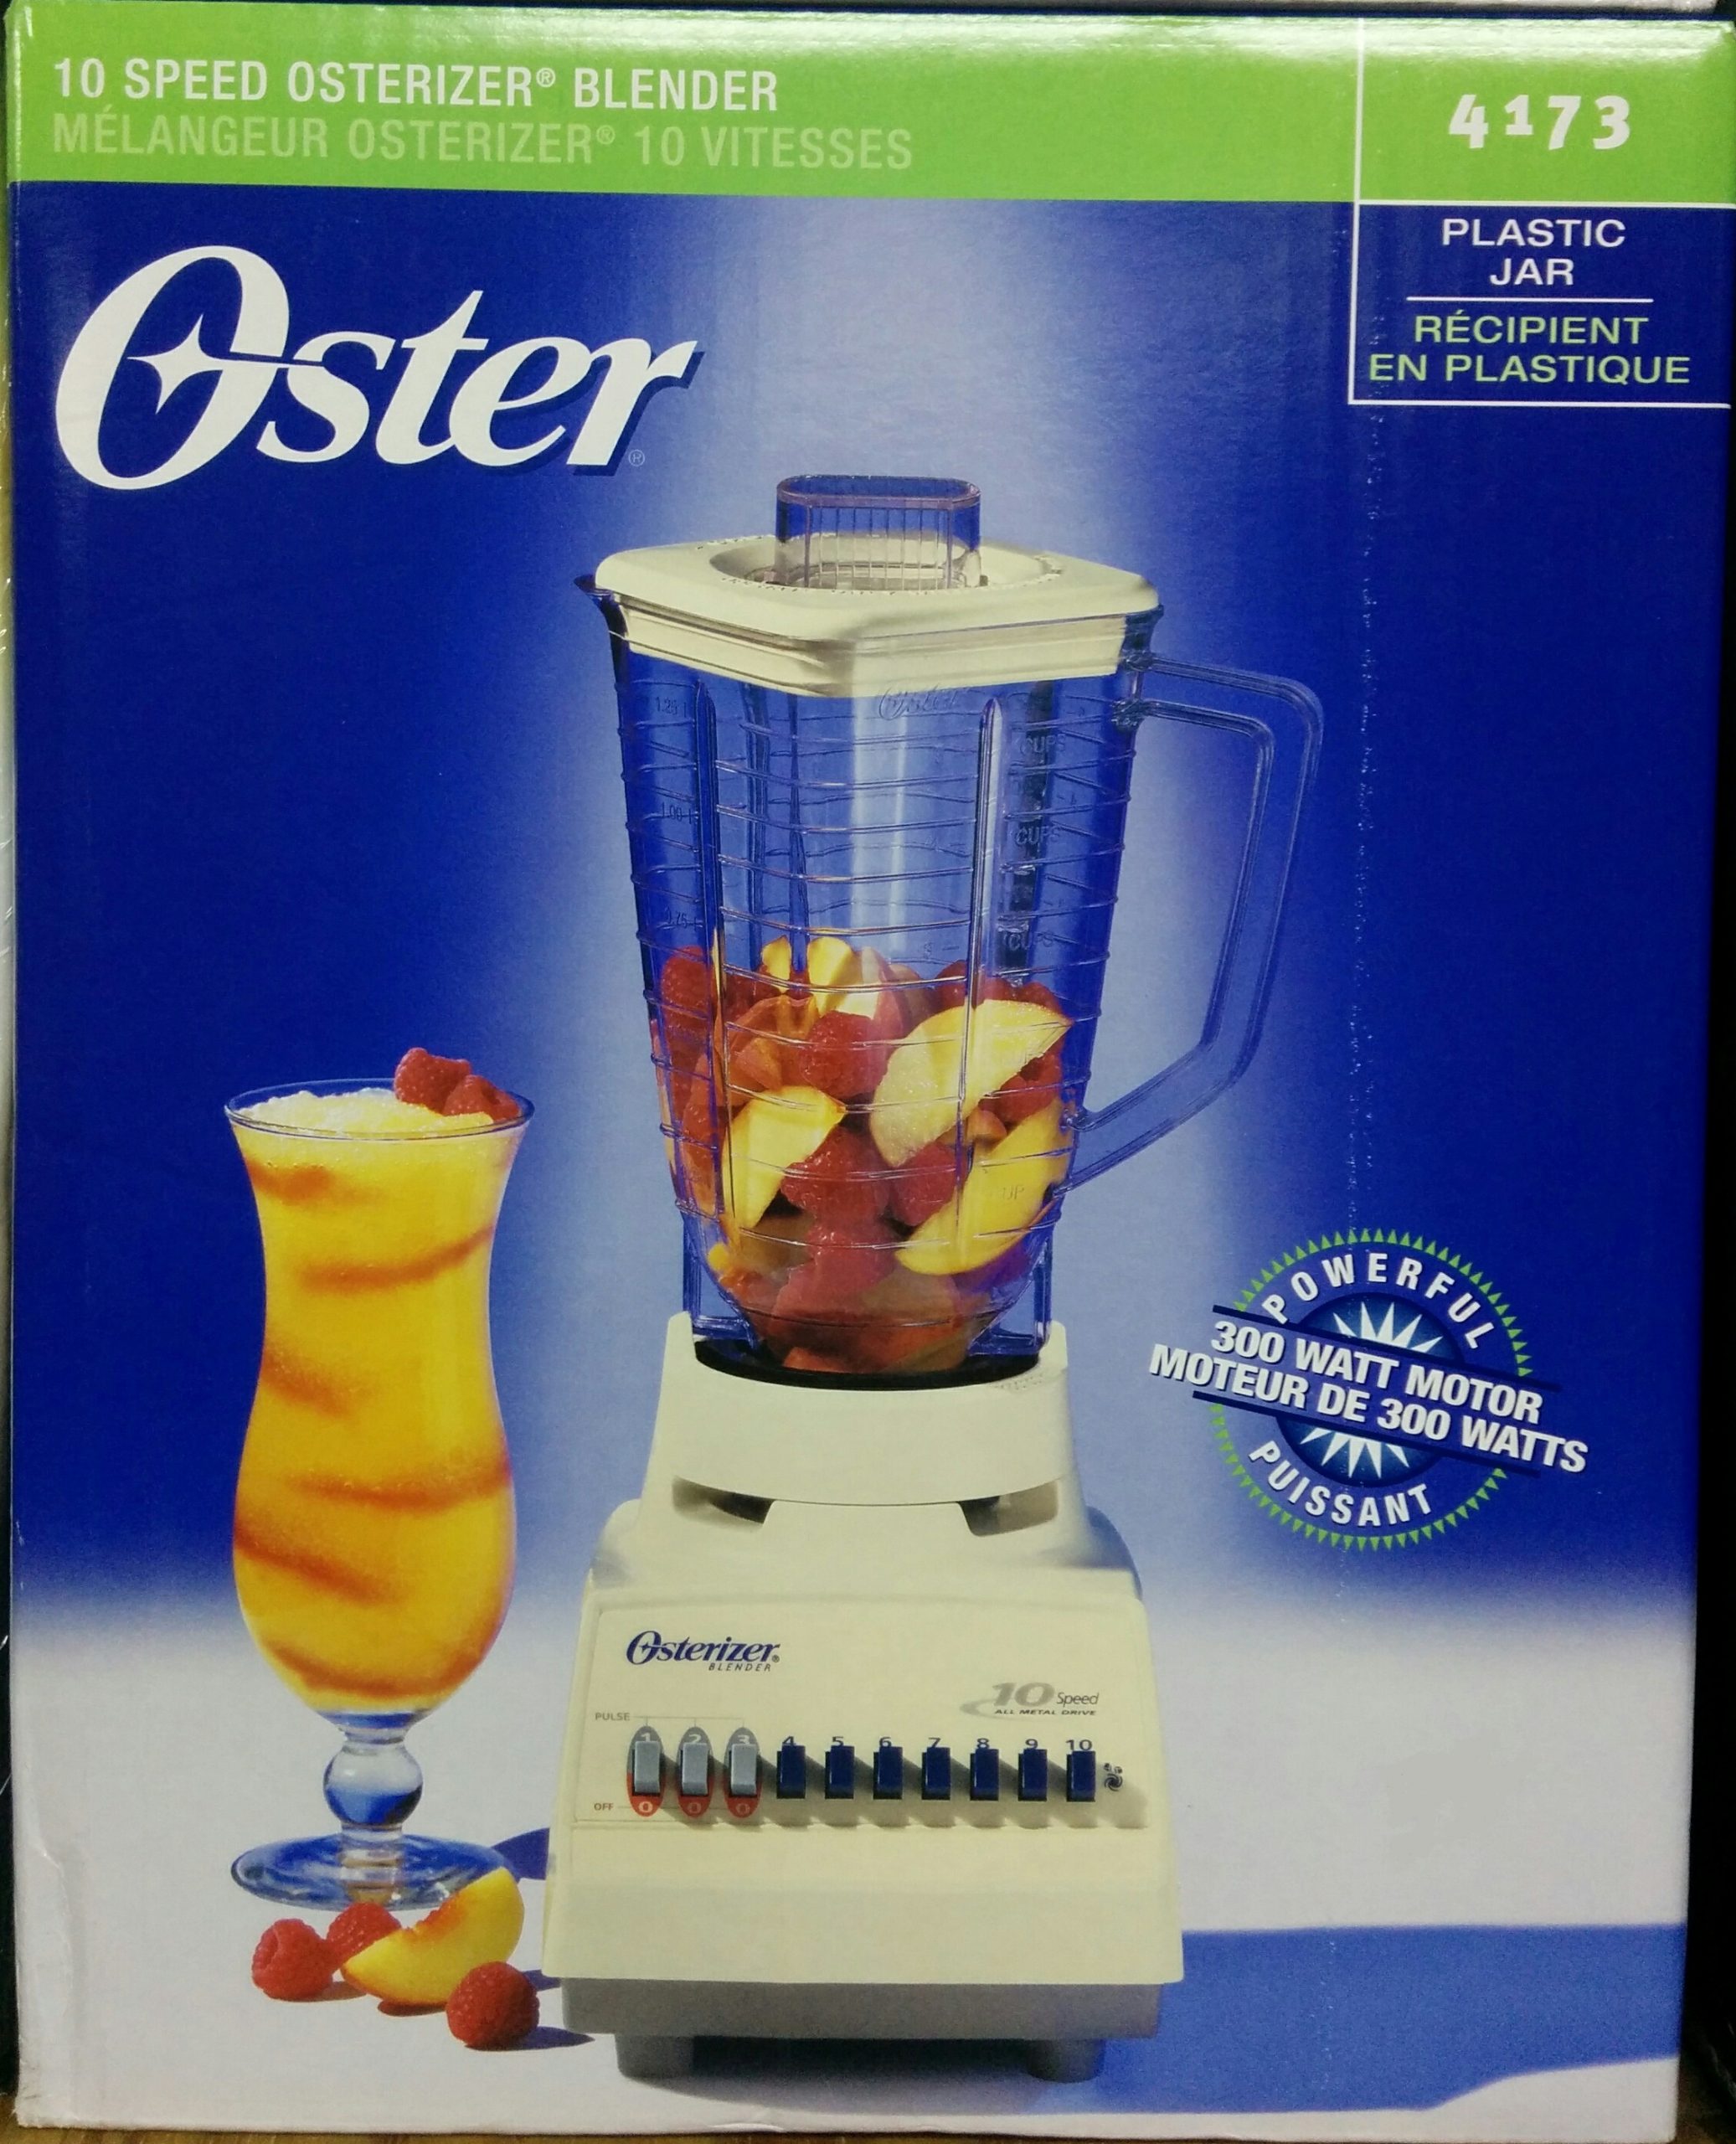 https://www.atozappliances.com/wp-content/uploads/2016/02/Oster4173-scaled.jpg